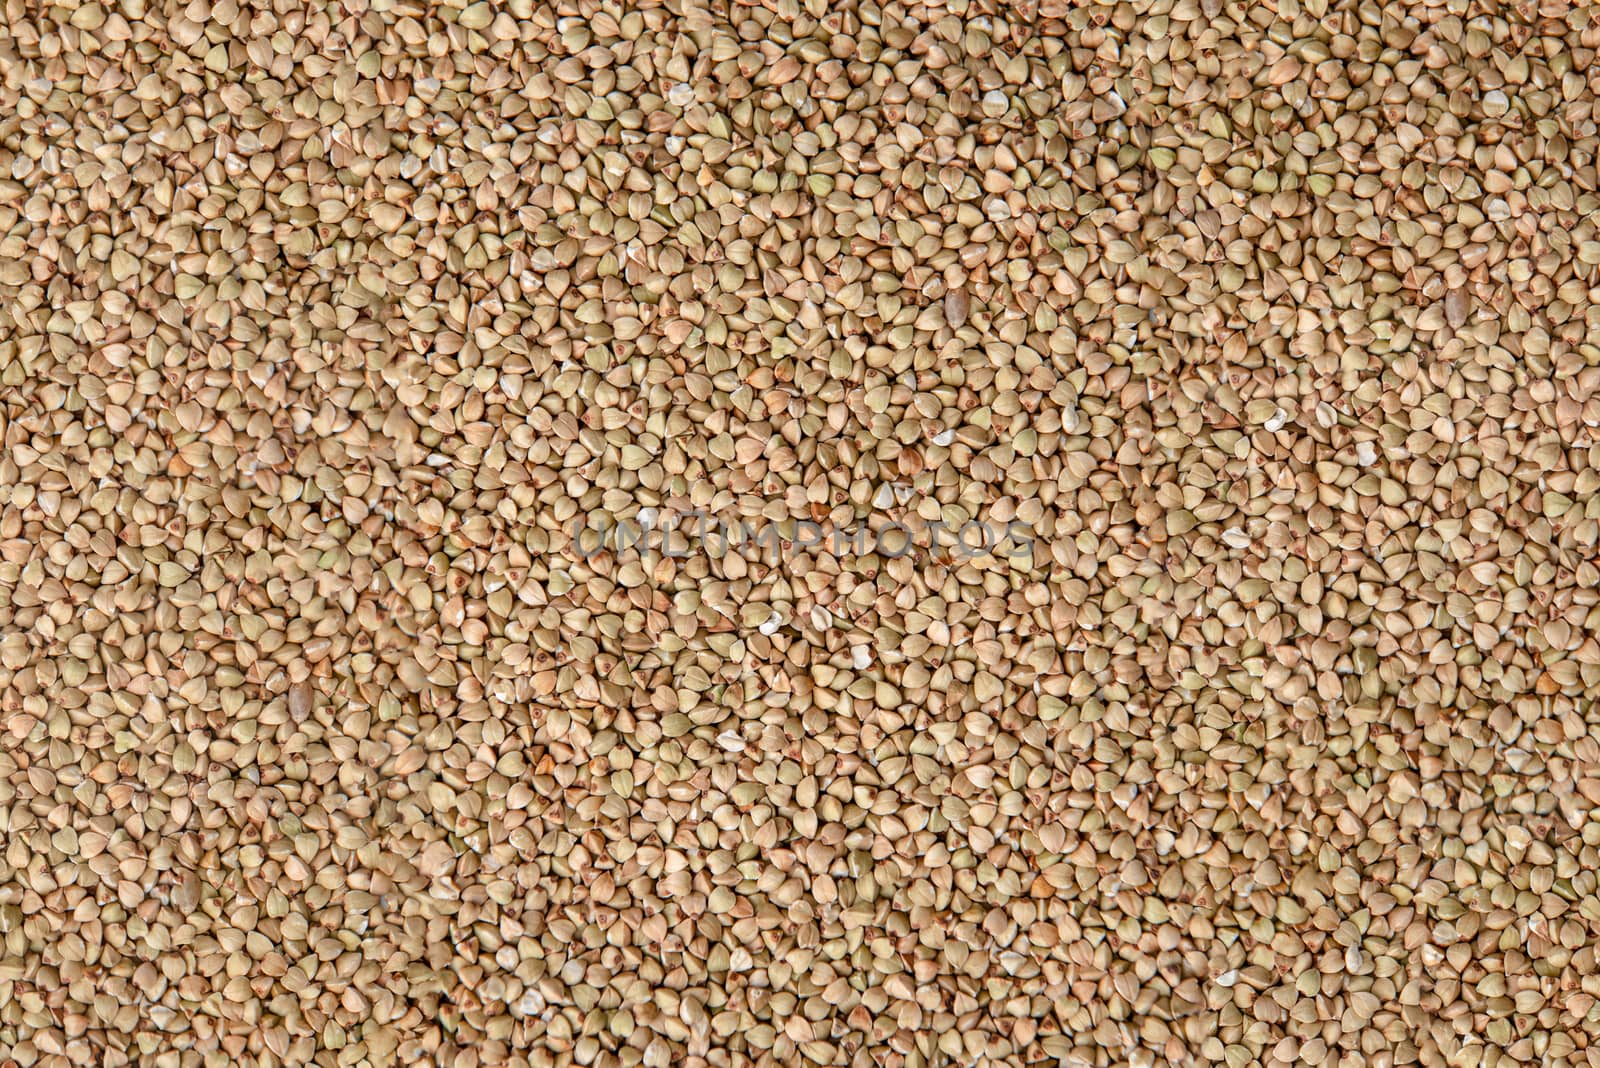 Raw buckwheat grains background texture with place for text by marynkin